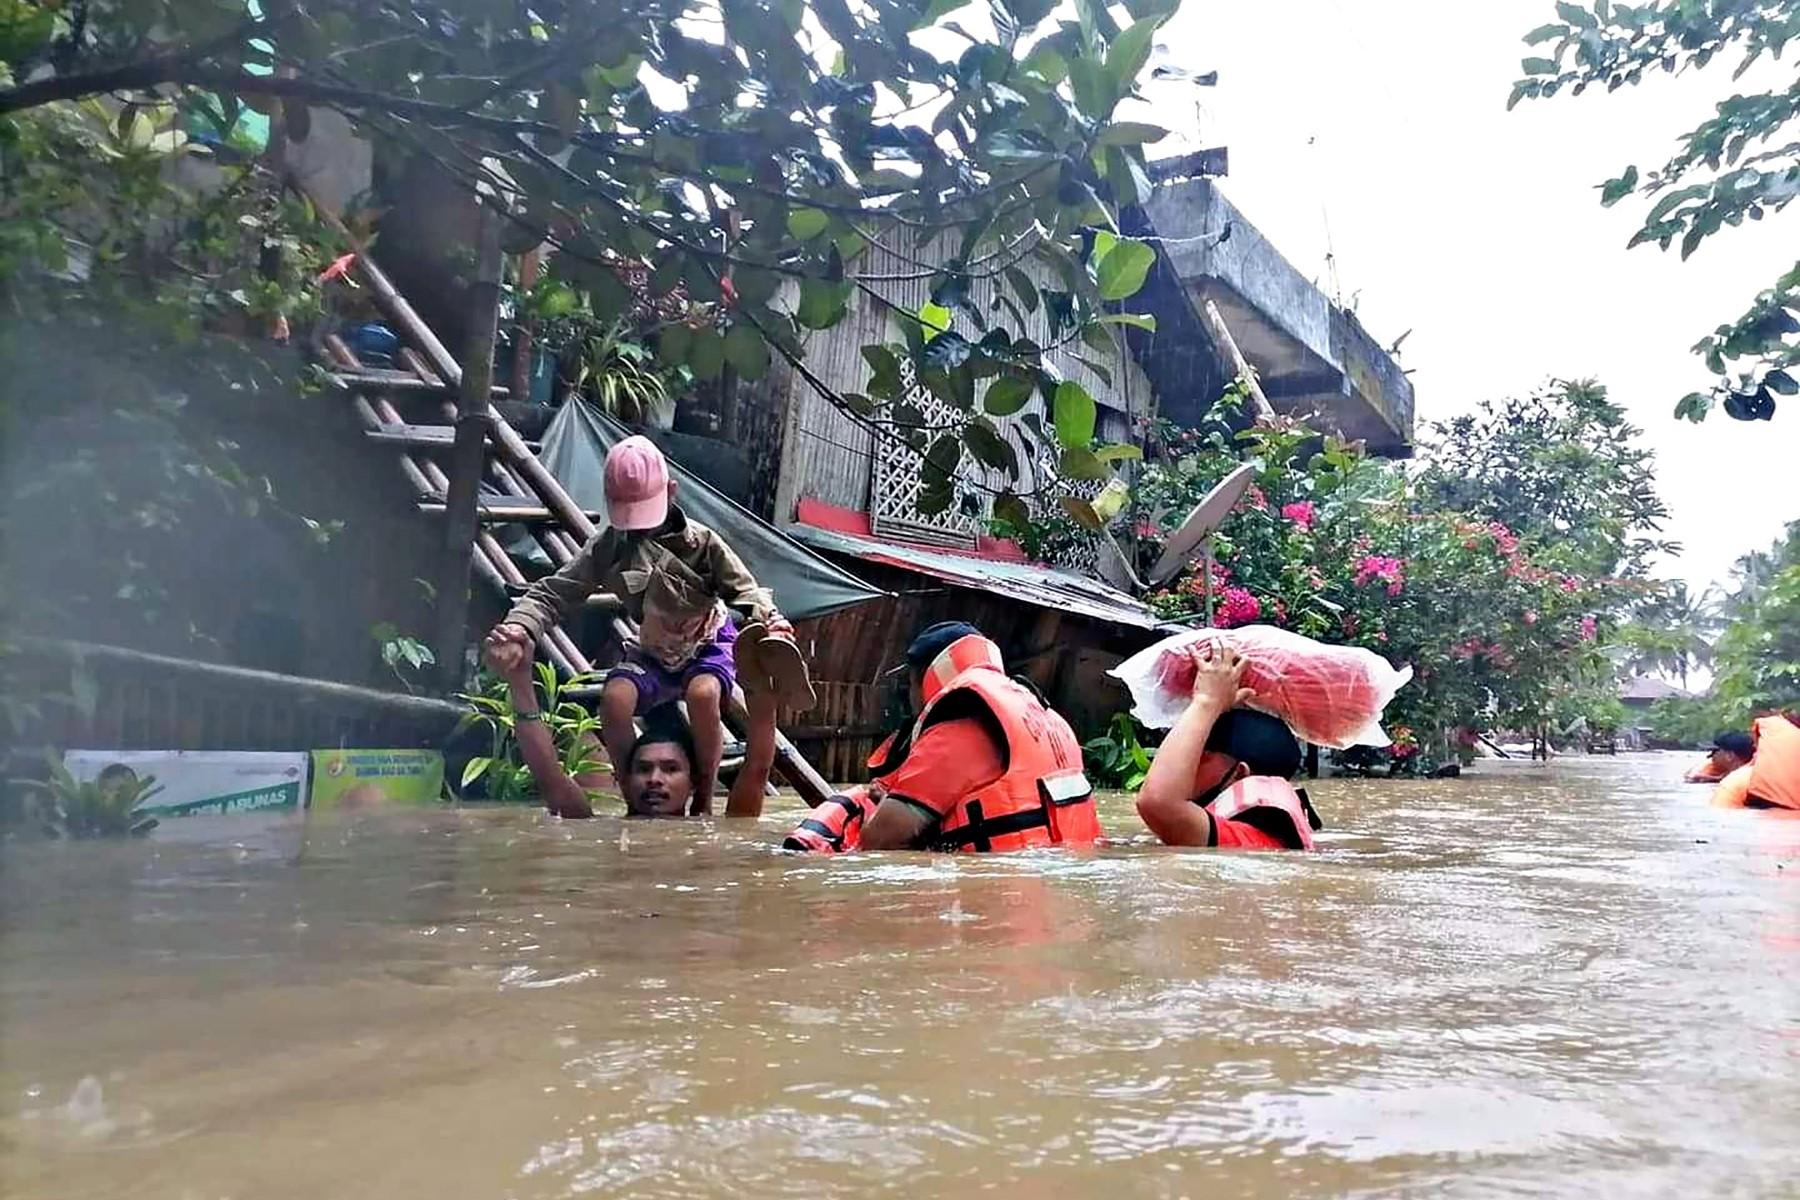 This handout photo taken on April 12, and received from the Philippine Coast Guard shows coast guard personnel evacuating local residents from their flooded homes in the town of Panitan, Capiz province as heavy rains brought on by Tropical Storm Megi inundated the area. Photo: AFP